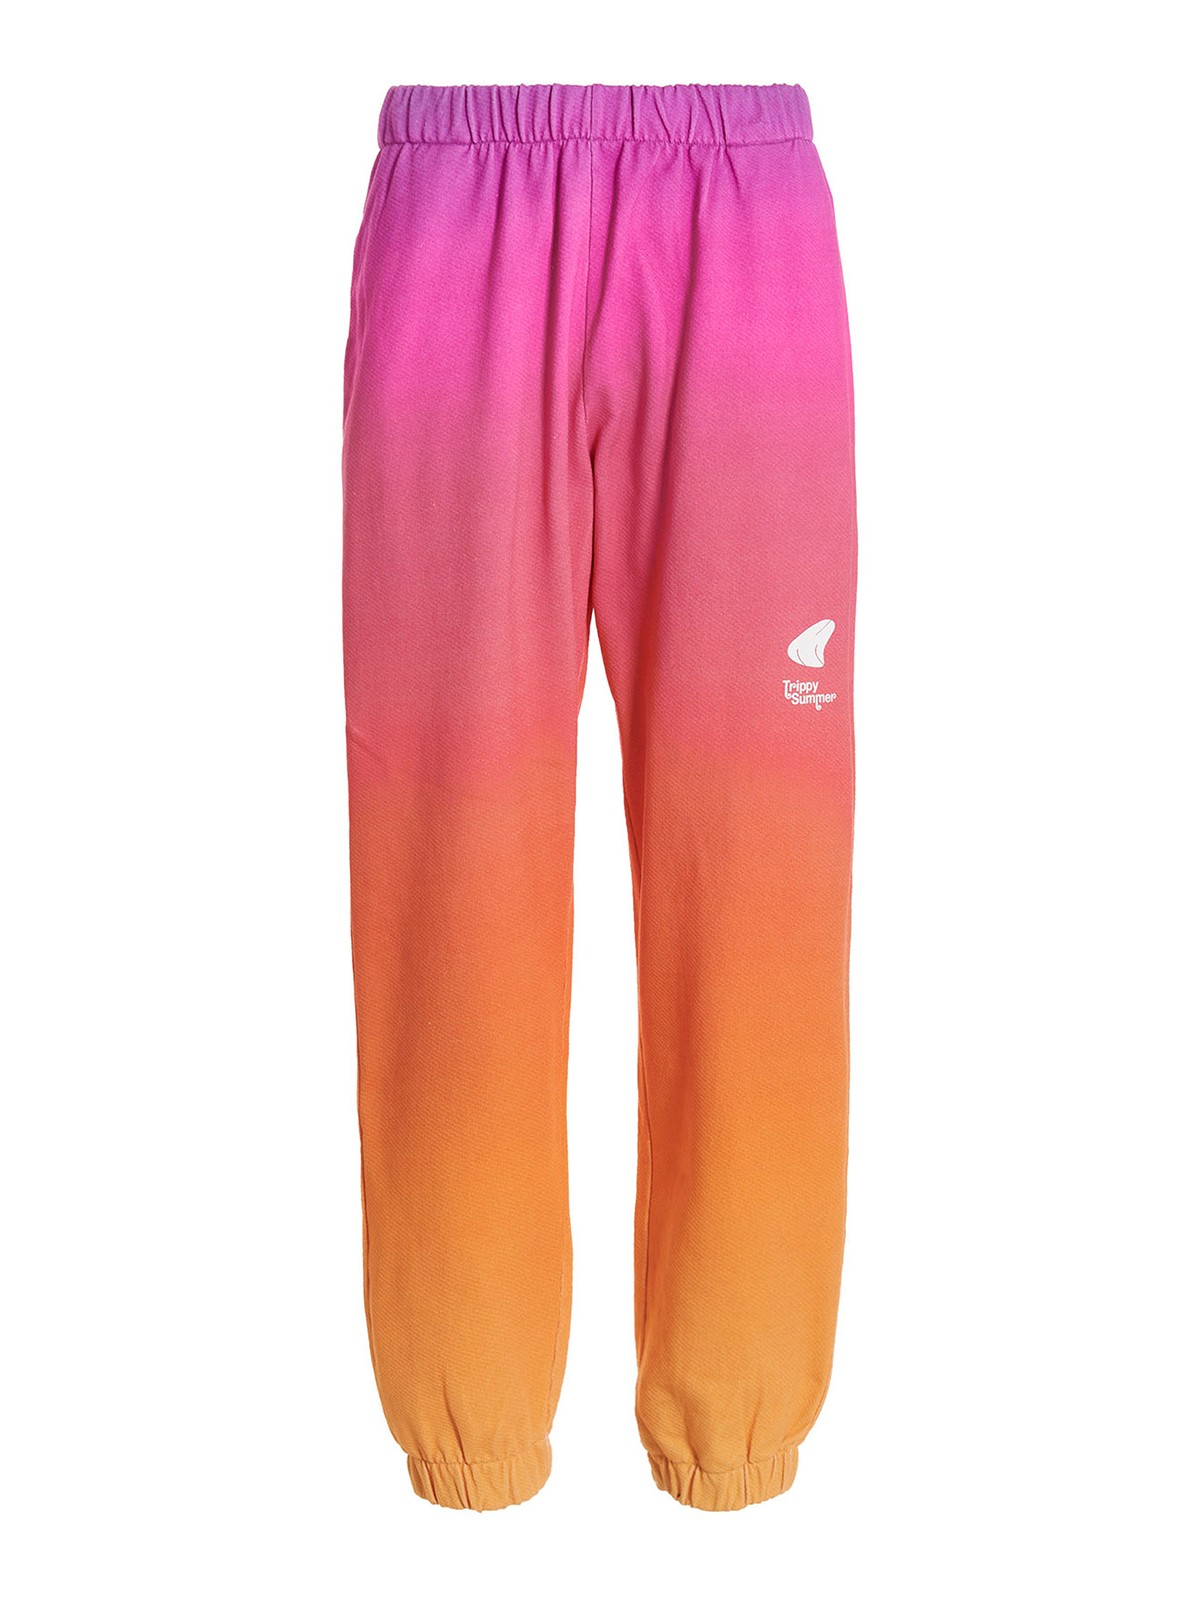 Tracksuit bottoms MSFTSrep - gradient joggers - 32MSF2P3422647509